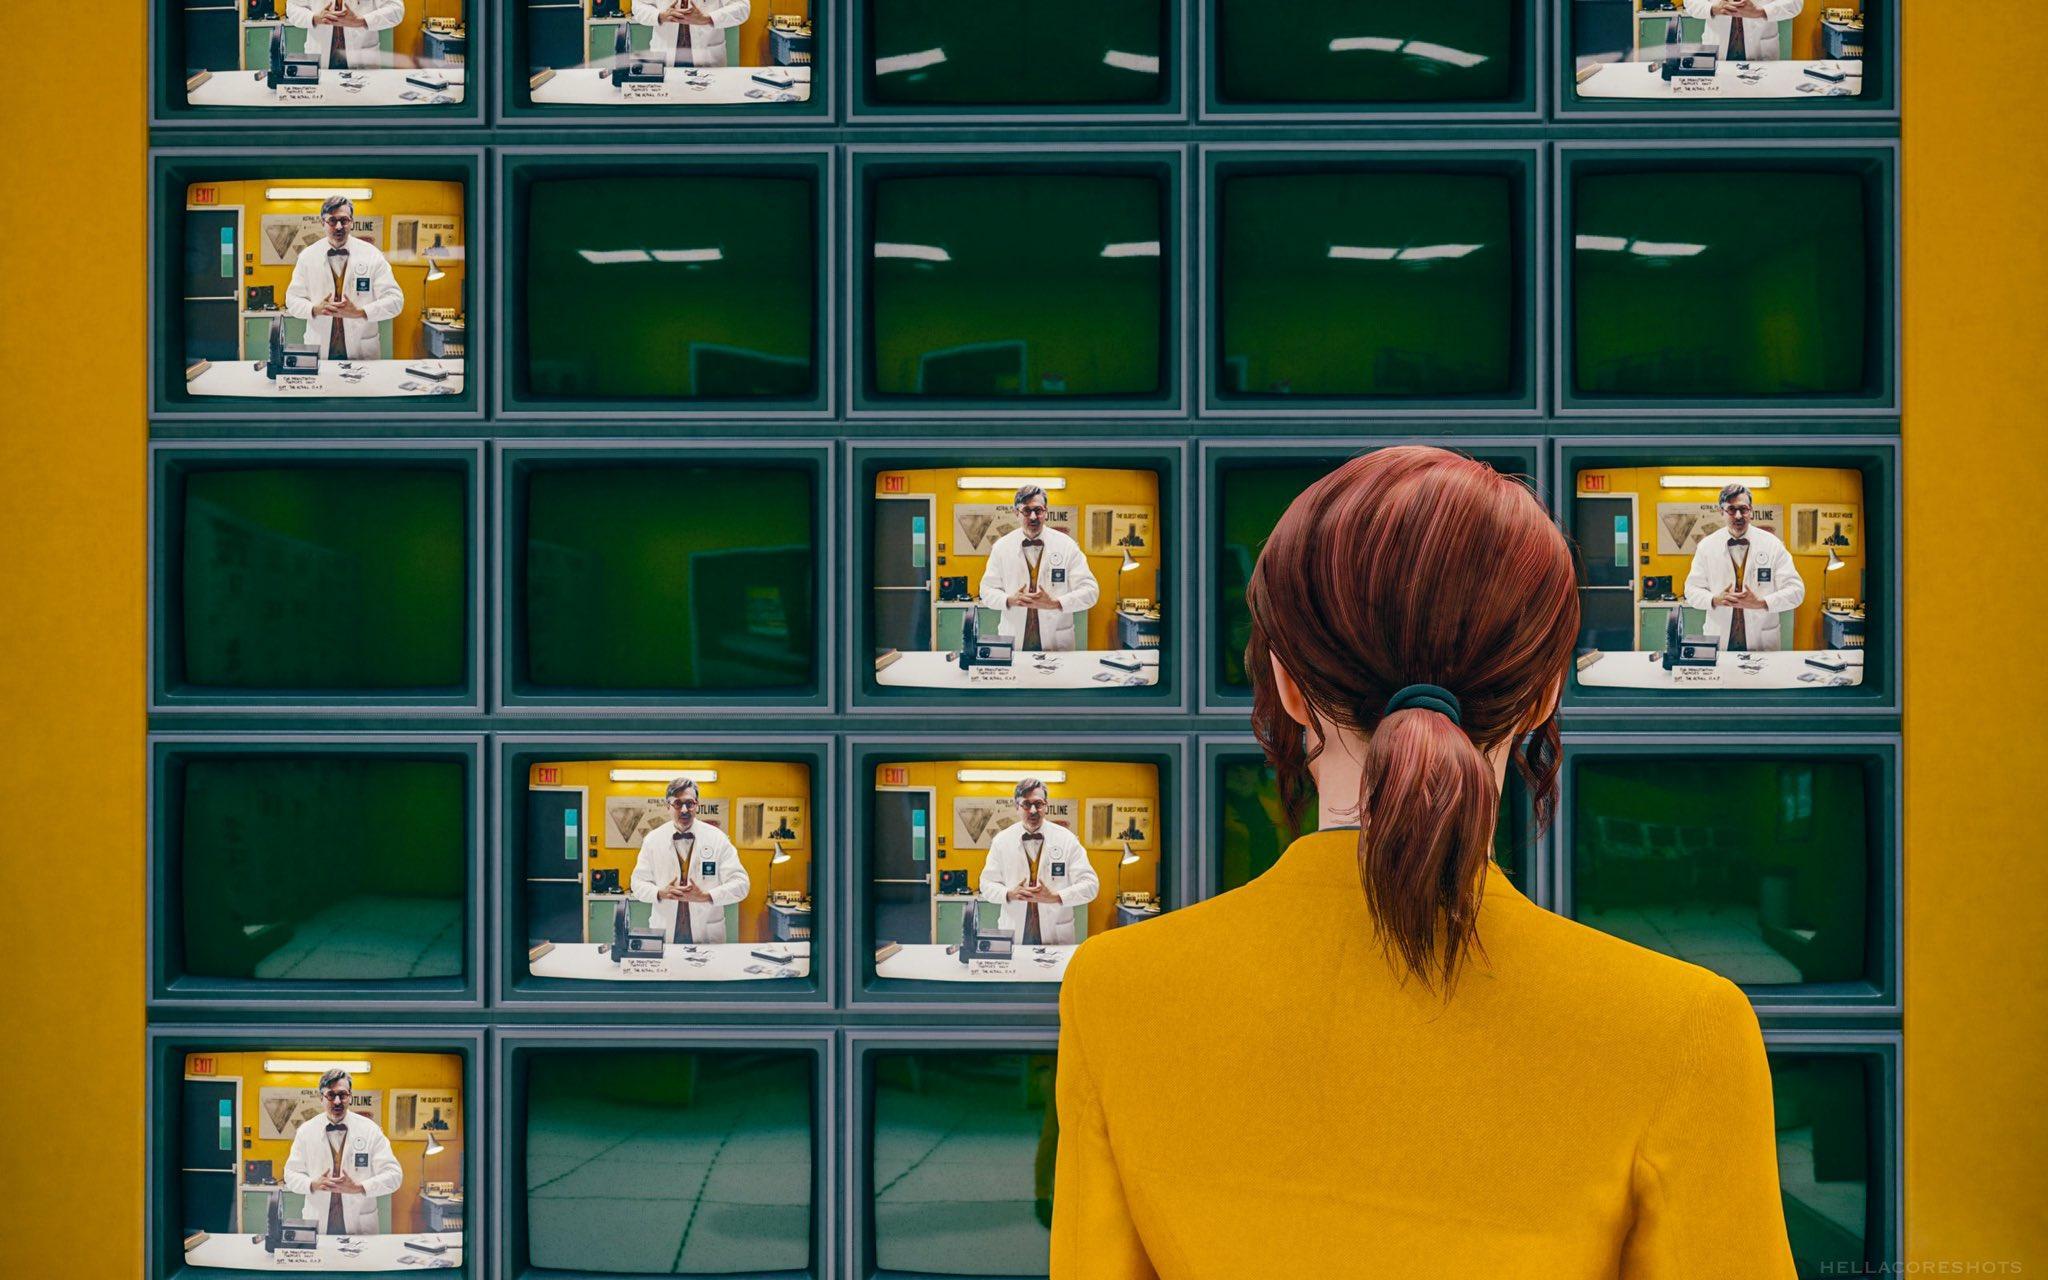 Jesse wearing her gold suit, stands in front of a series of screens showing a pre-recorded message from Casper Darling. [Image by hellacoreshots on Twitter.]